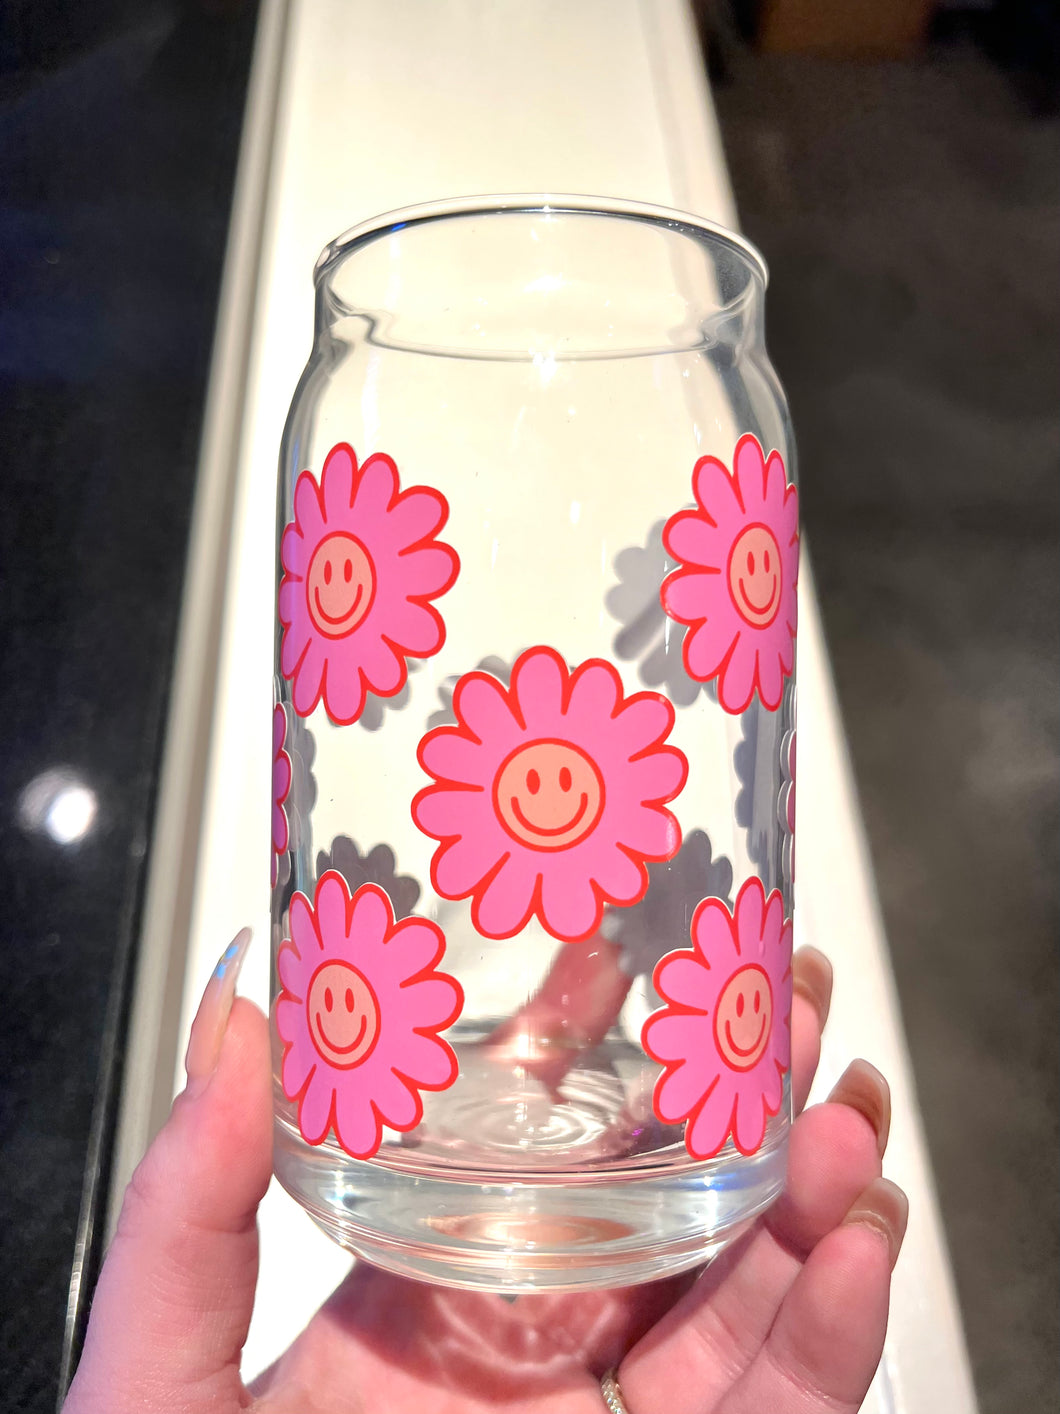 Happy Flowers Cup